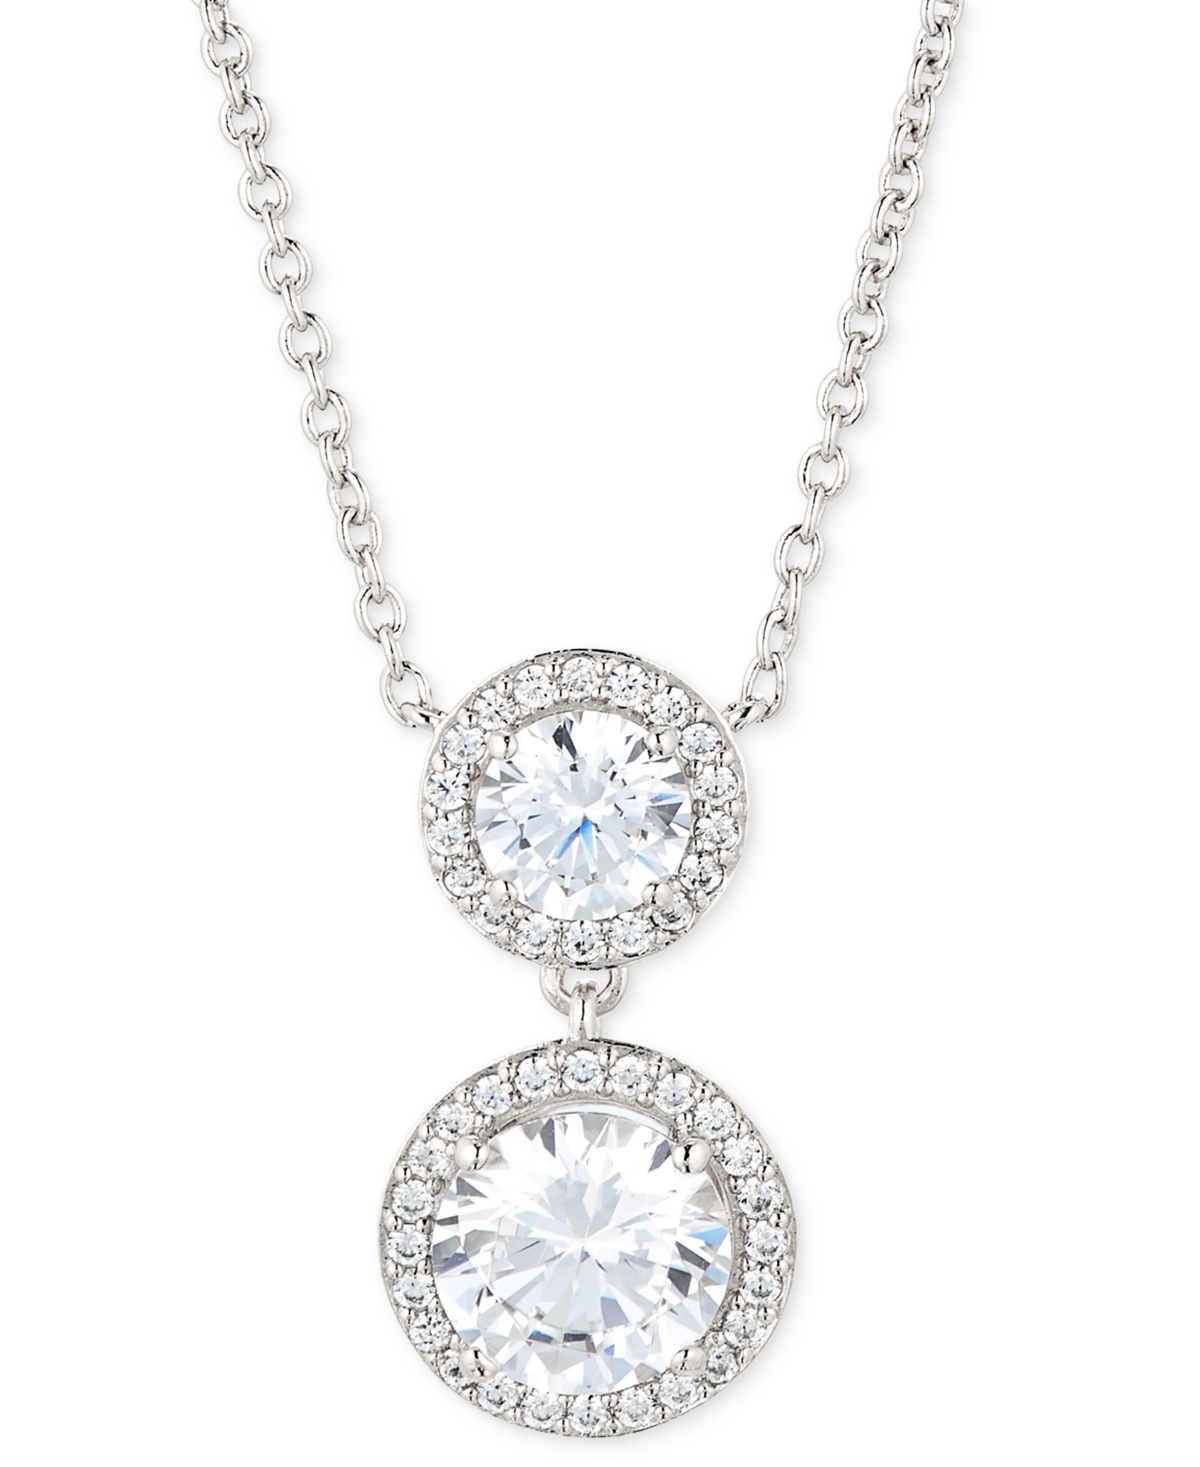 Silver-Tone Cubic Zirconia Round Halo Pendant Necklace, 16" + 2" extender, Created for Macy's - Silver